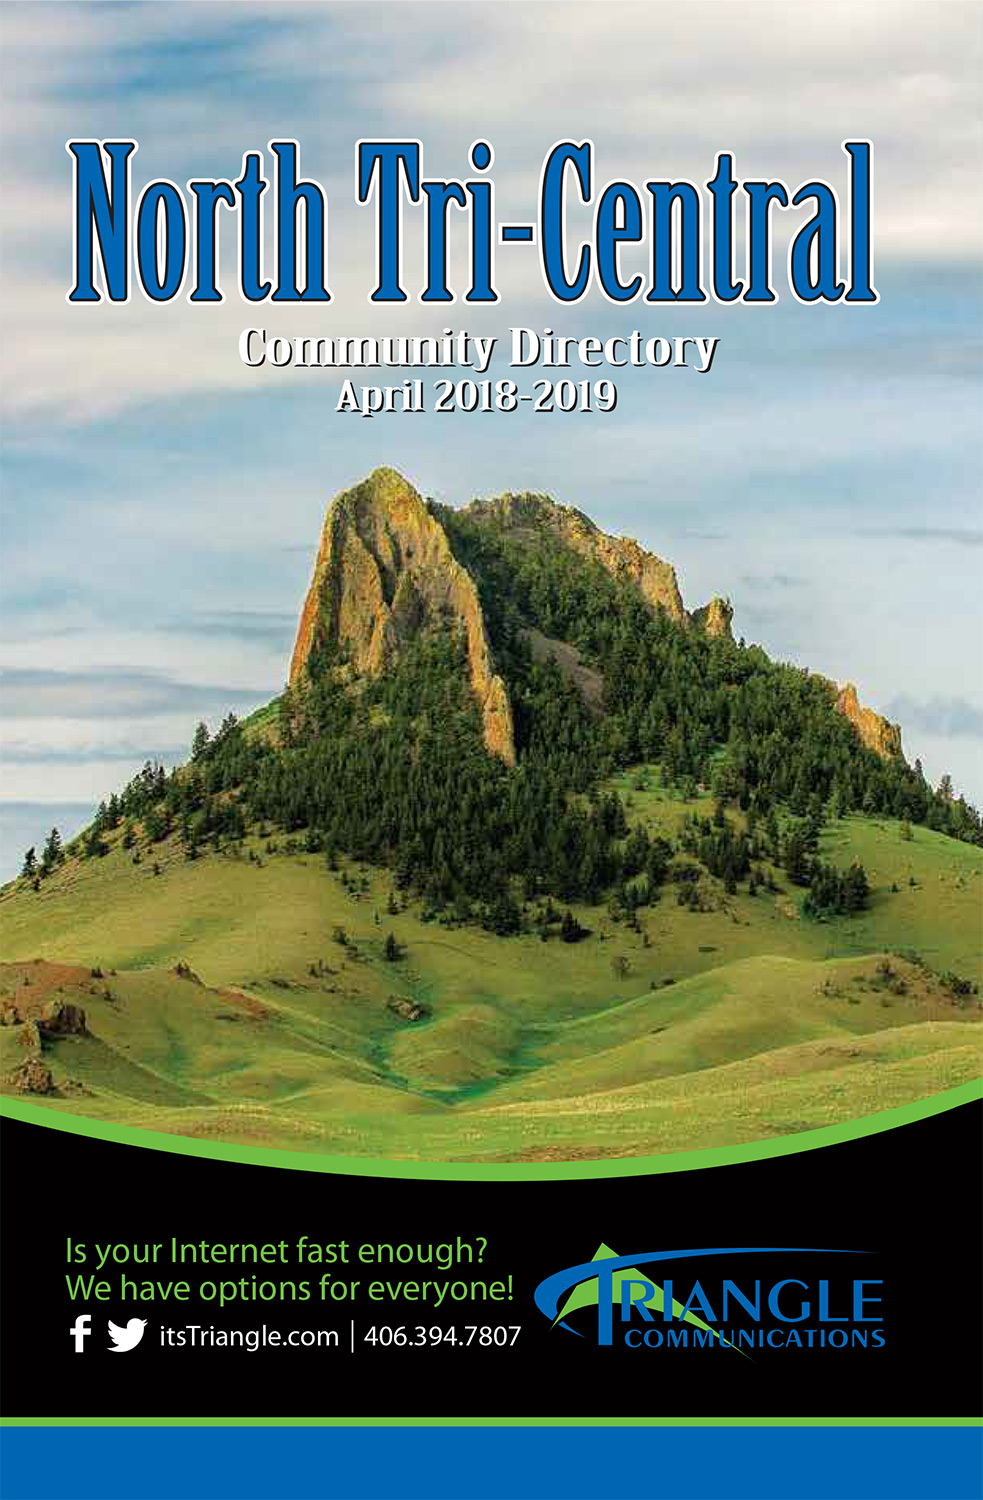 Montana Landscape Photography on Cover of Telephone Directory